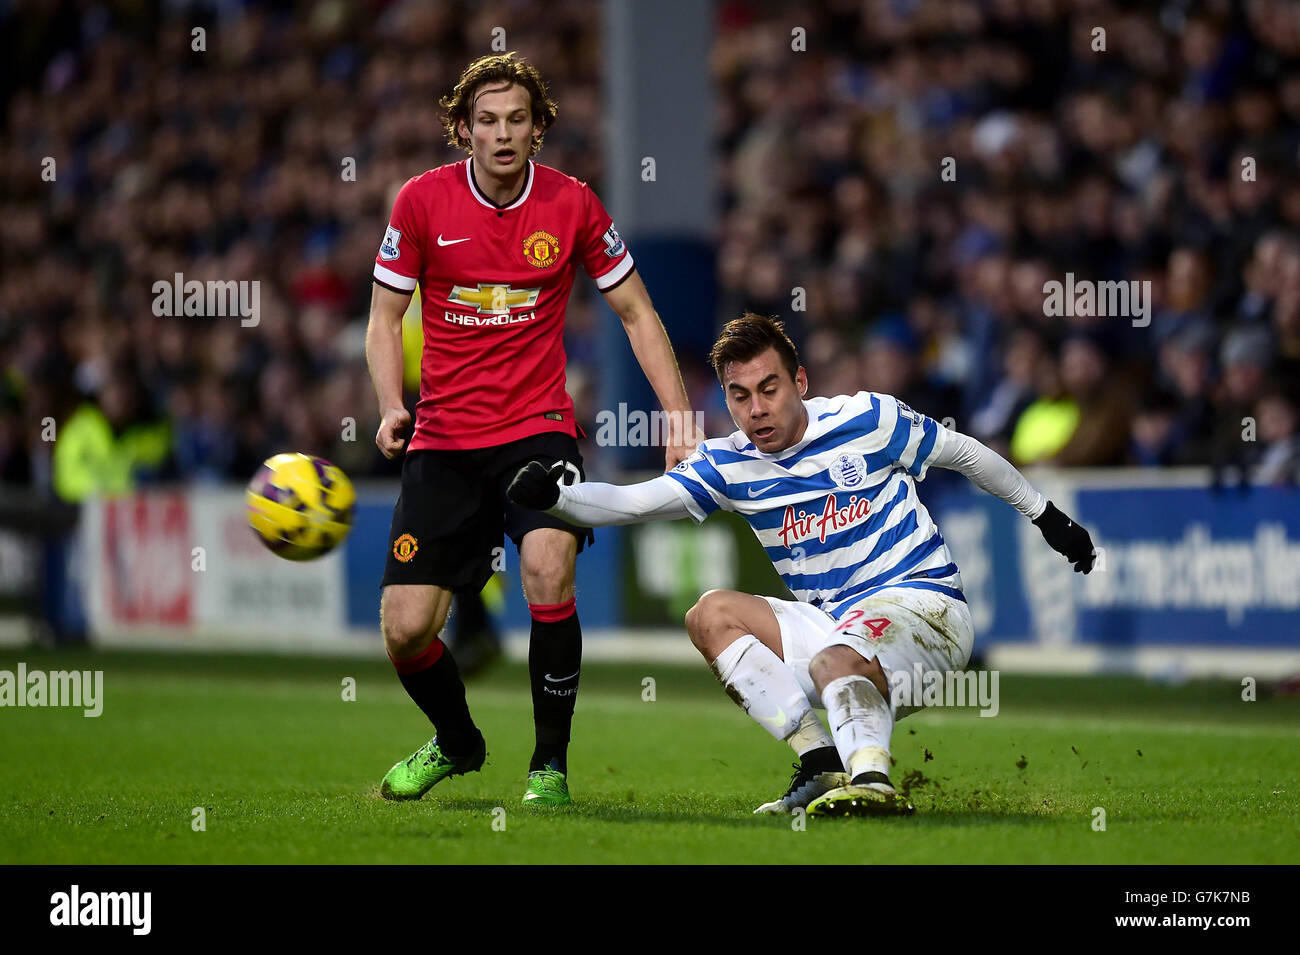 Queens Park Rangers' Eduardo Vargas (right) and Manchester United's Daley Blind (left) battle for the ball during the Barclays Premier League match at Loftus Road, London. PRESS ASSOCIATION Photo. Picture date: Saturday January 17, 2015. See PA story SOCCER QPR. Picture credit should read: Adam Davy/PA Wire. Stock Photo